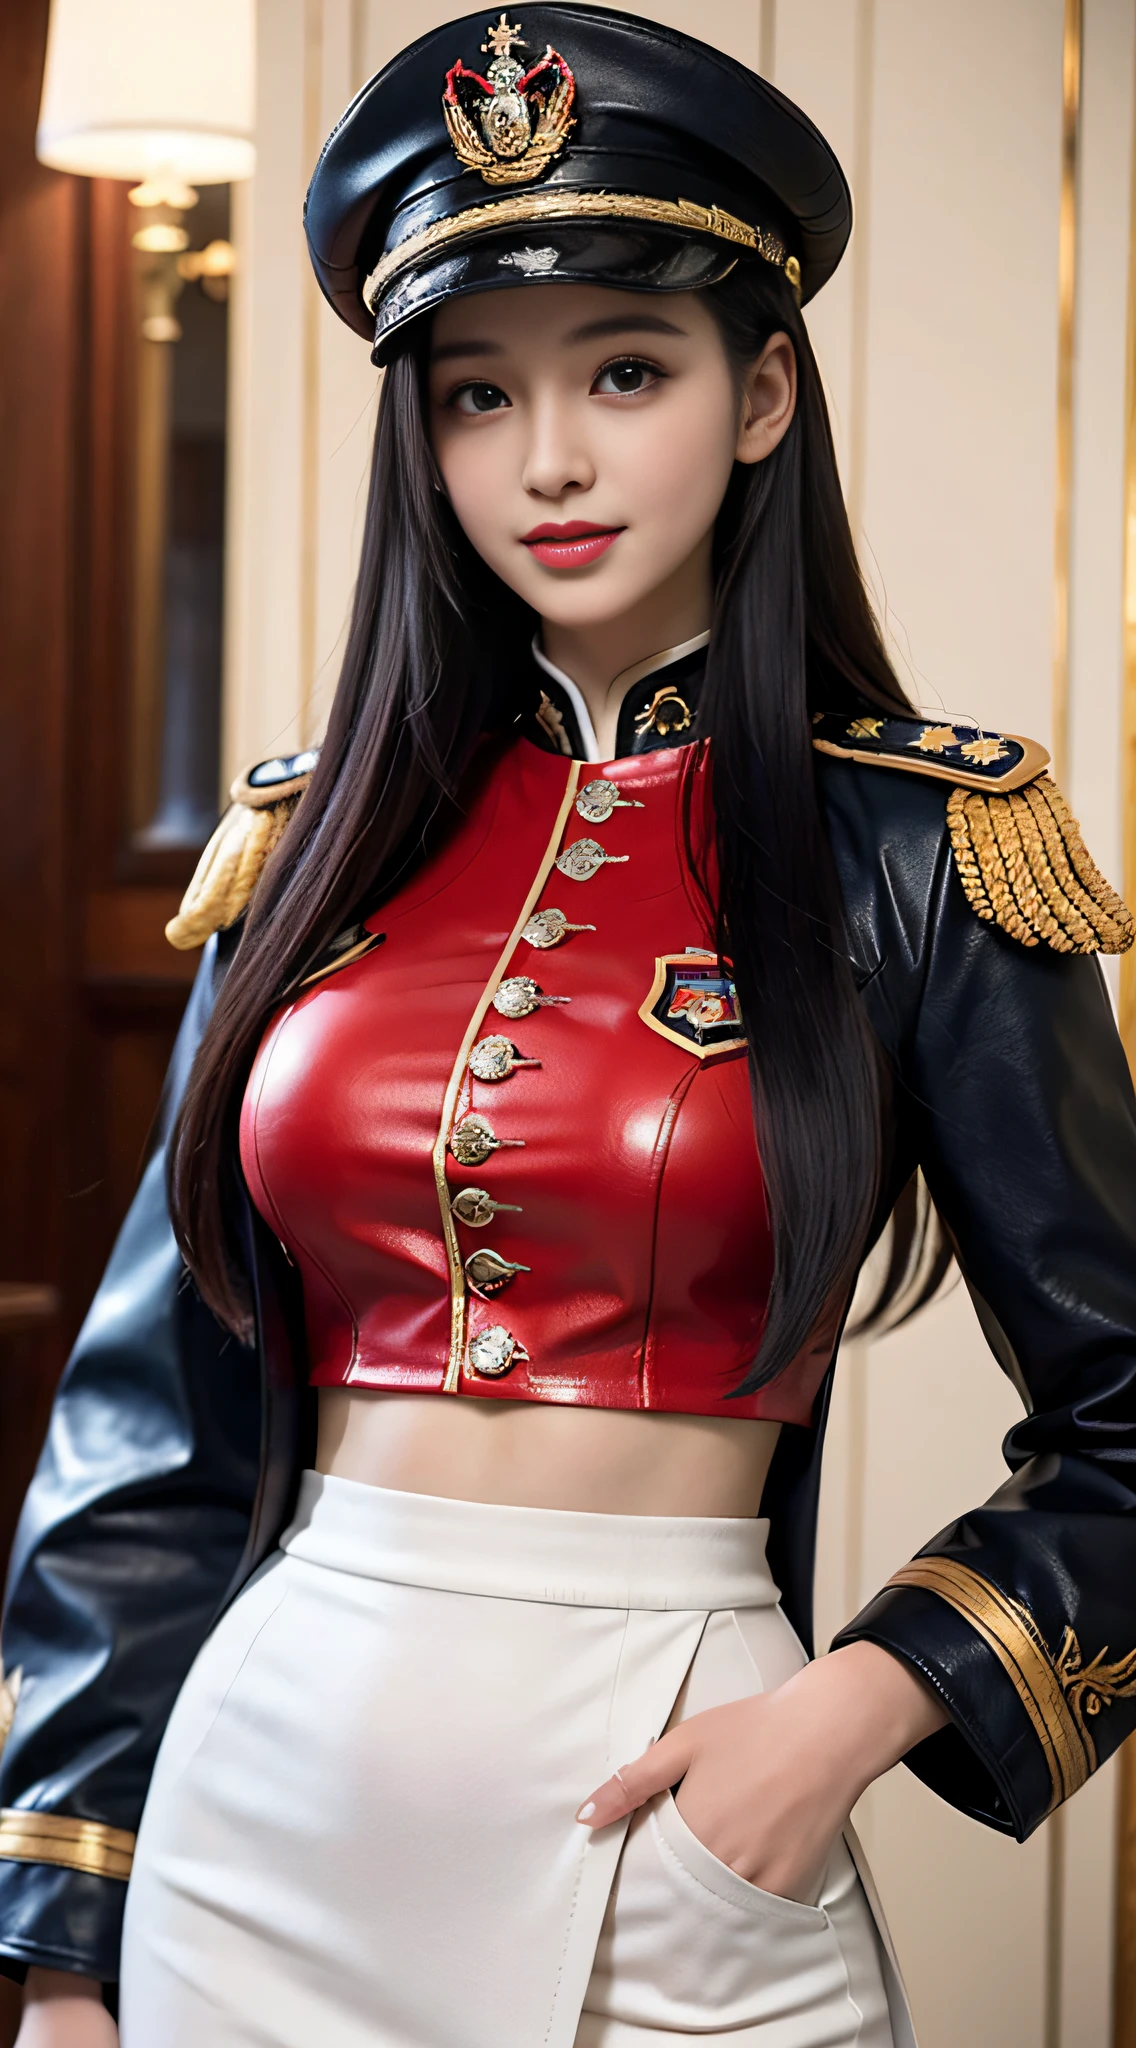 "Top CG, highest quality, smile, delicate and delicate beautiful girl, imperial pope, {{185cm big beauty}}, (tall), royal sister, military lady temperament, holy pope, fair skin, exposed chest, long legs, perfect facial features, bright eyes, officer hat, red lips, beautiful and cold, {{big breasts}}, beautiful and handsome, long blue hair, officer epaulettes, see-through visible skin, {{girl in red army coat}}, super detailed, { Blue lines on clothes}, delicate glowing eyes, crop top, white and blue leather clothing, tight leather clothing, 4K picture quality, urban beauty, modern urban, realistic portrait,